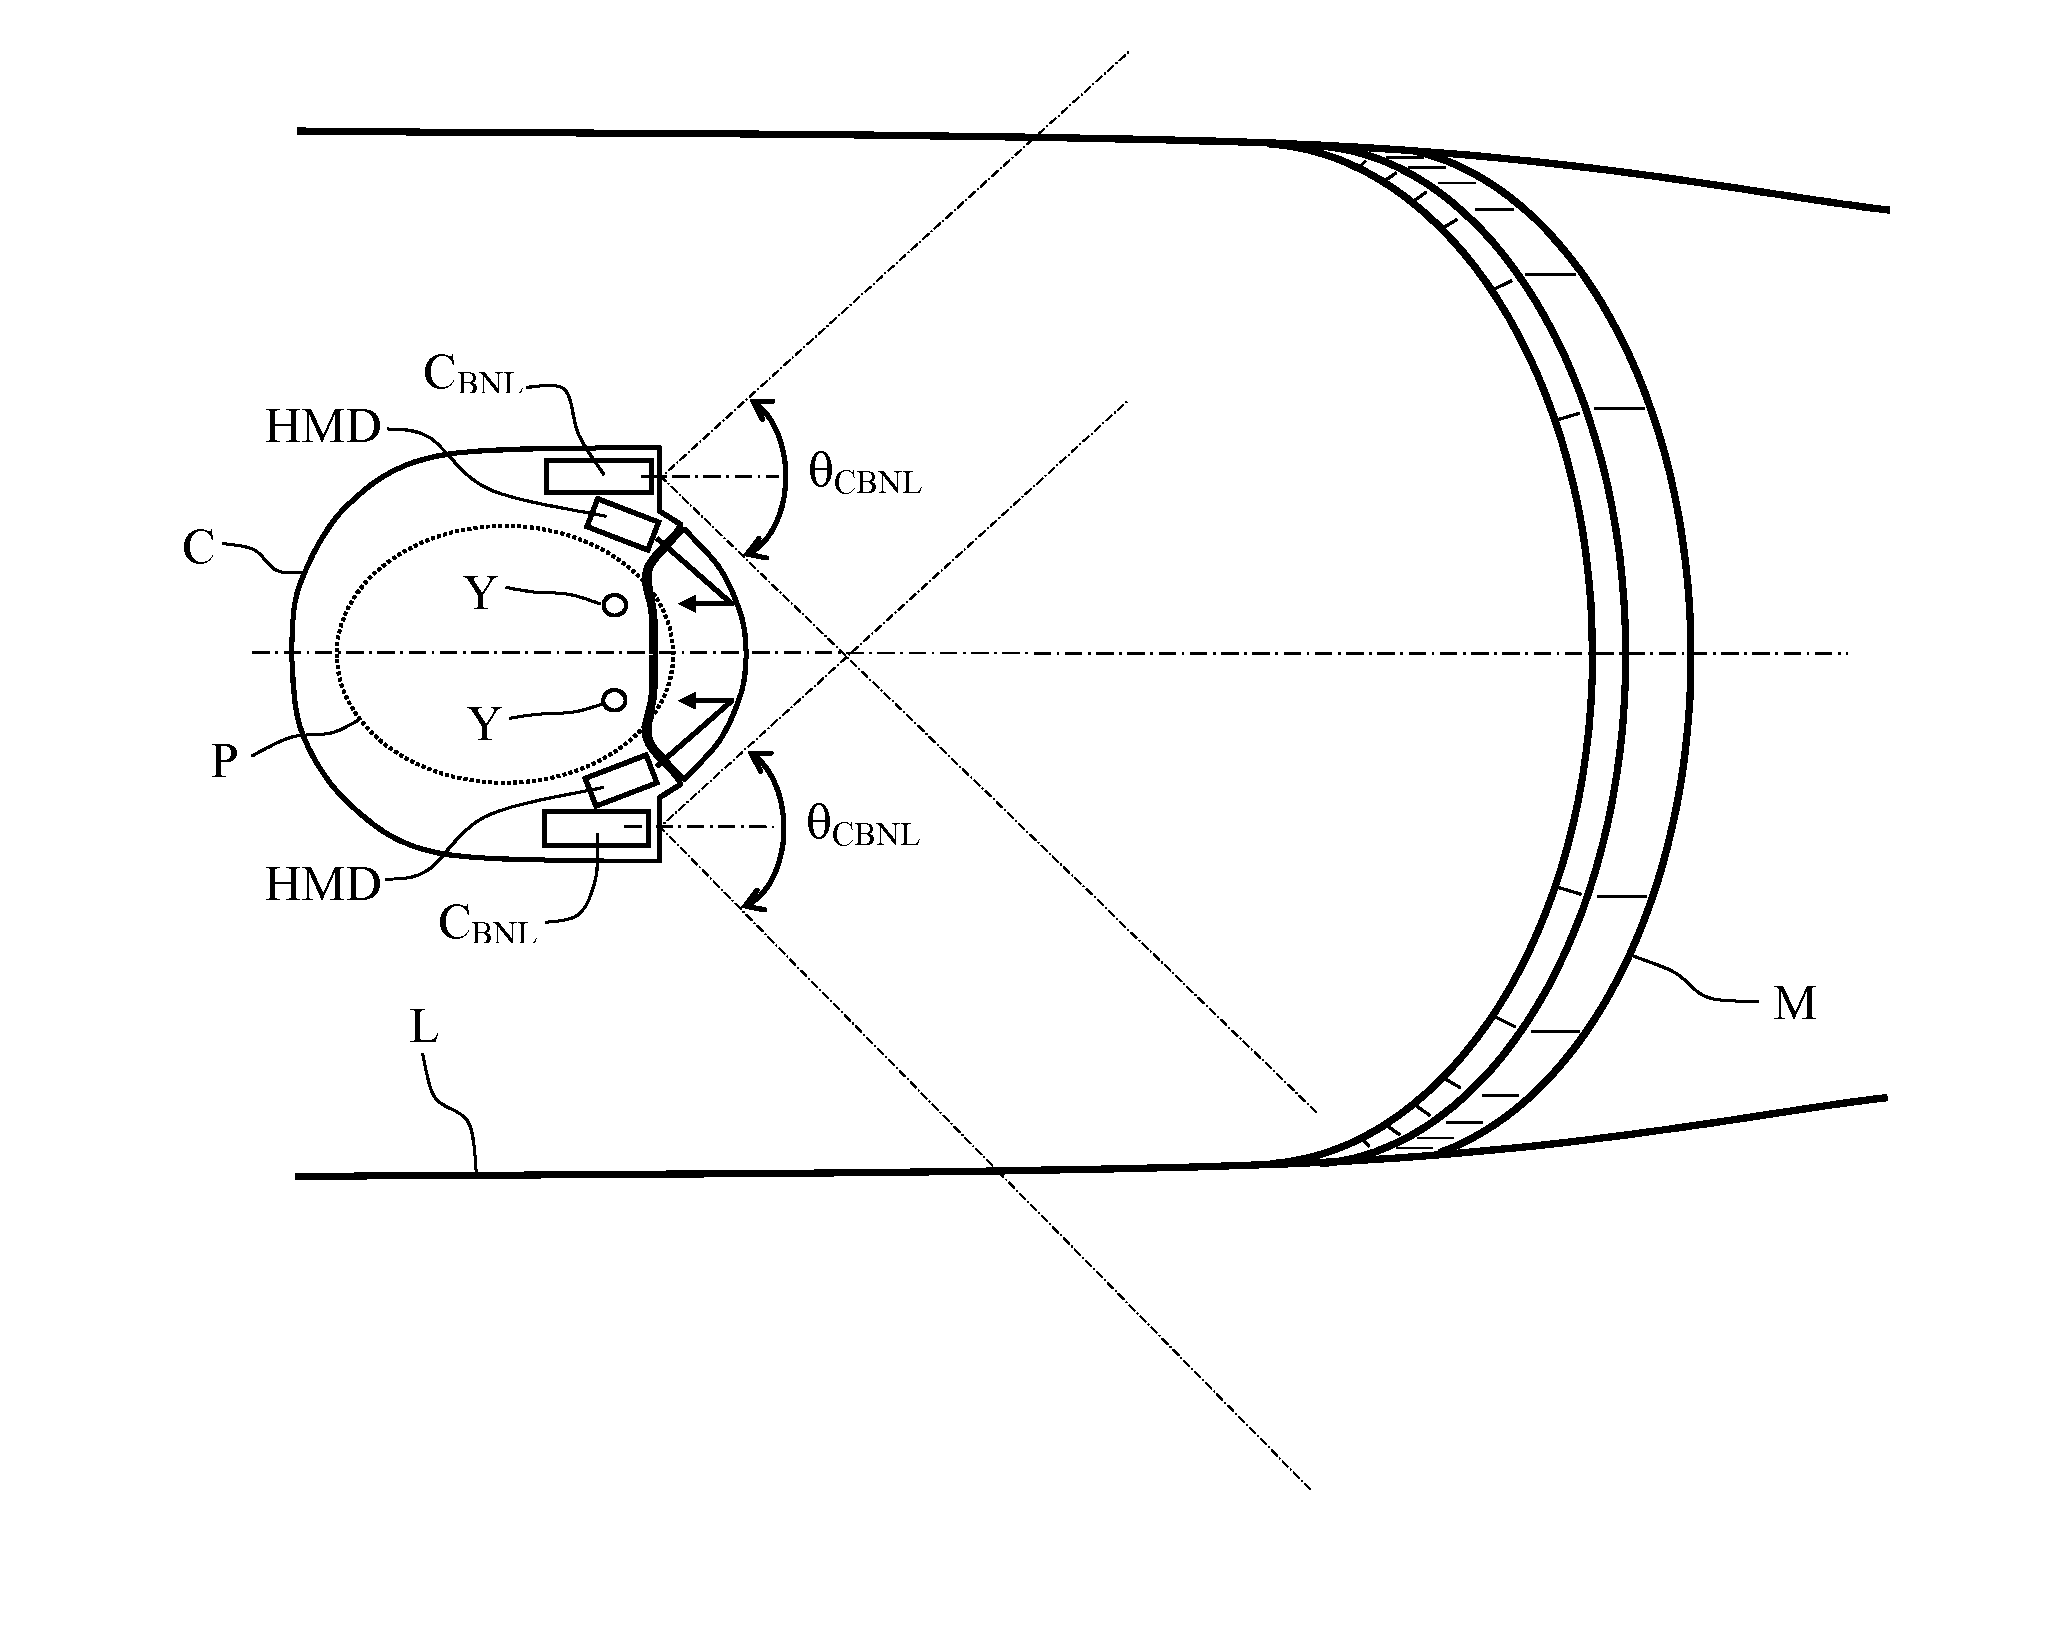 Method for Eliminating a Cockpit Mask and Associated Helmet-Mounted Display System